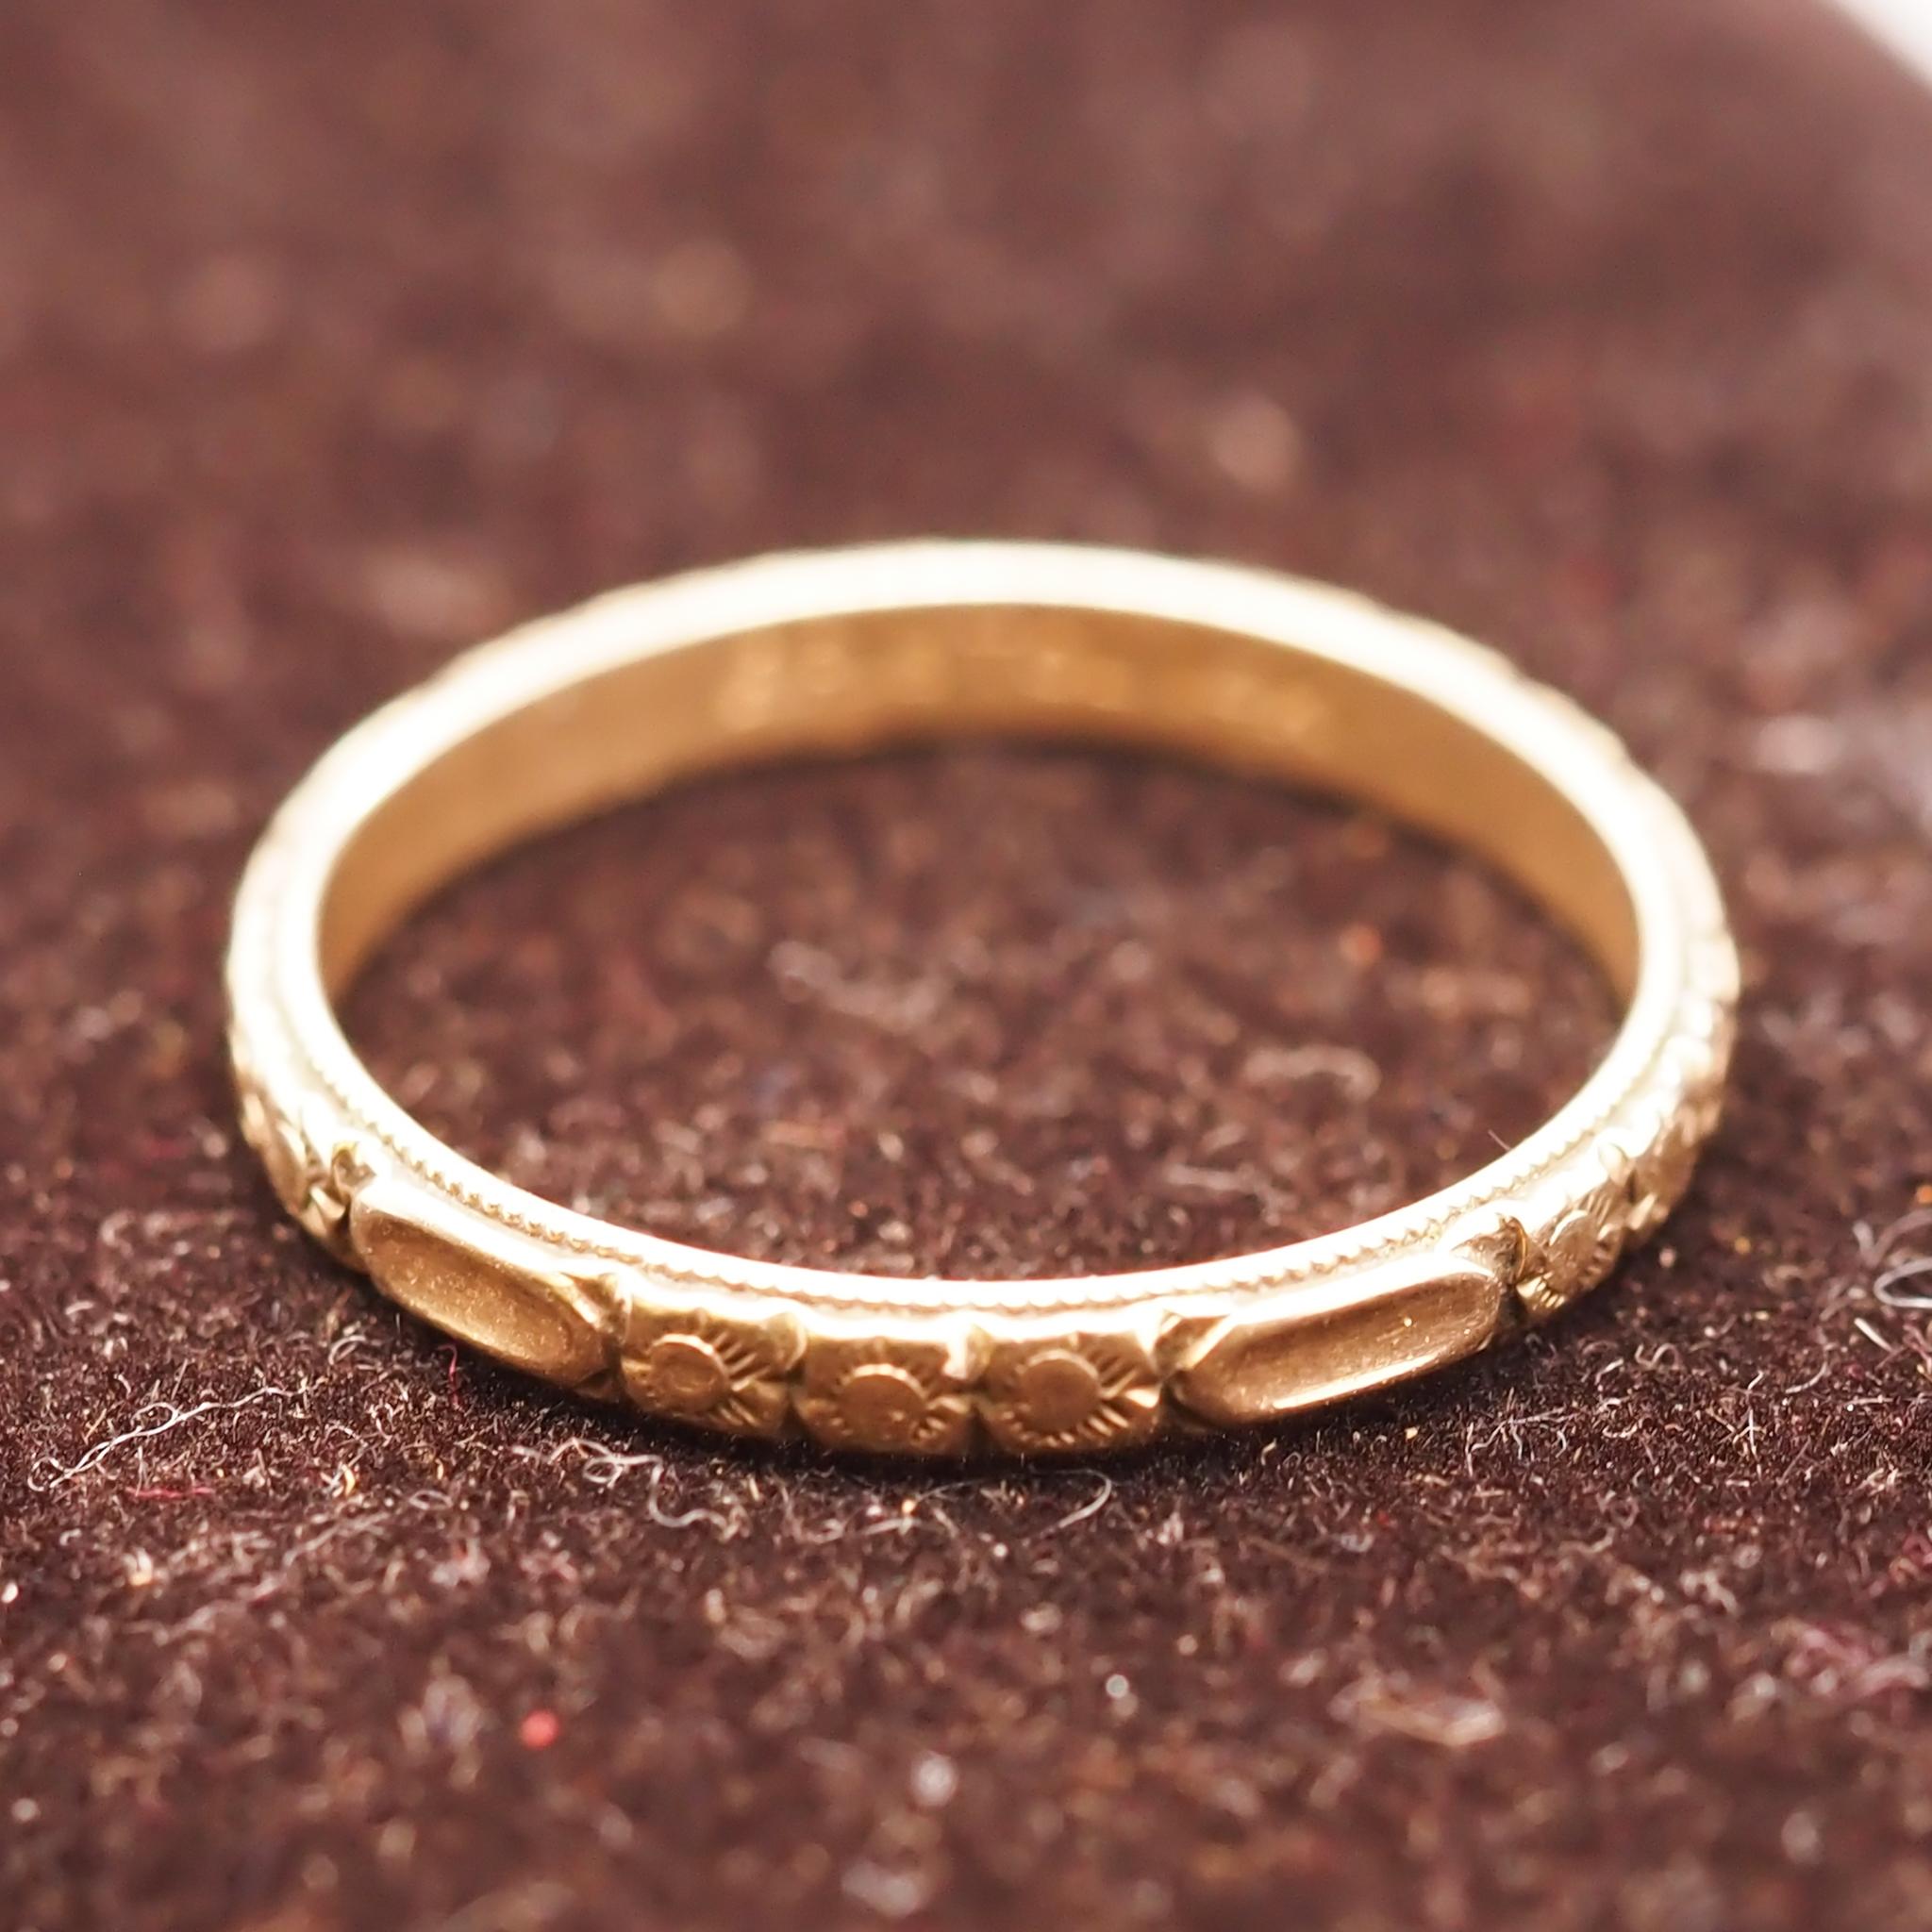 Year: 1920s

Item Details:
Ring Size: 6.25
Metal Type: 14K Yellow Gold [Hallmarked, and Tested]
Weight: 1.5 grams

Band Width: 2.2mm
Condition: Excellent

